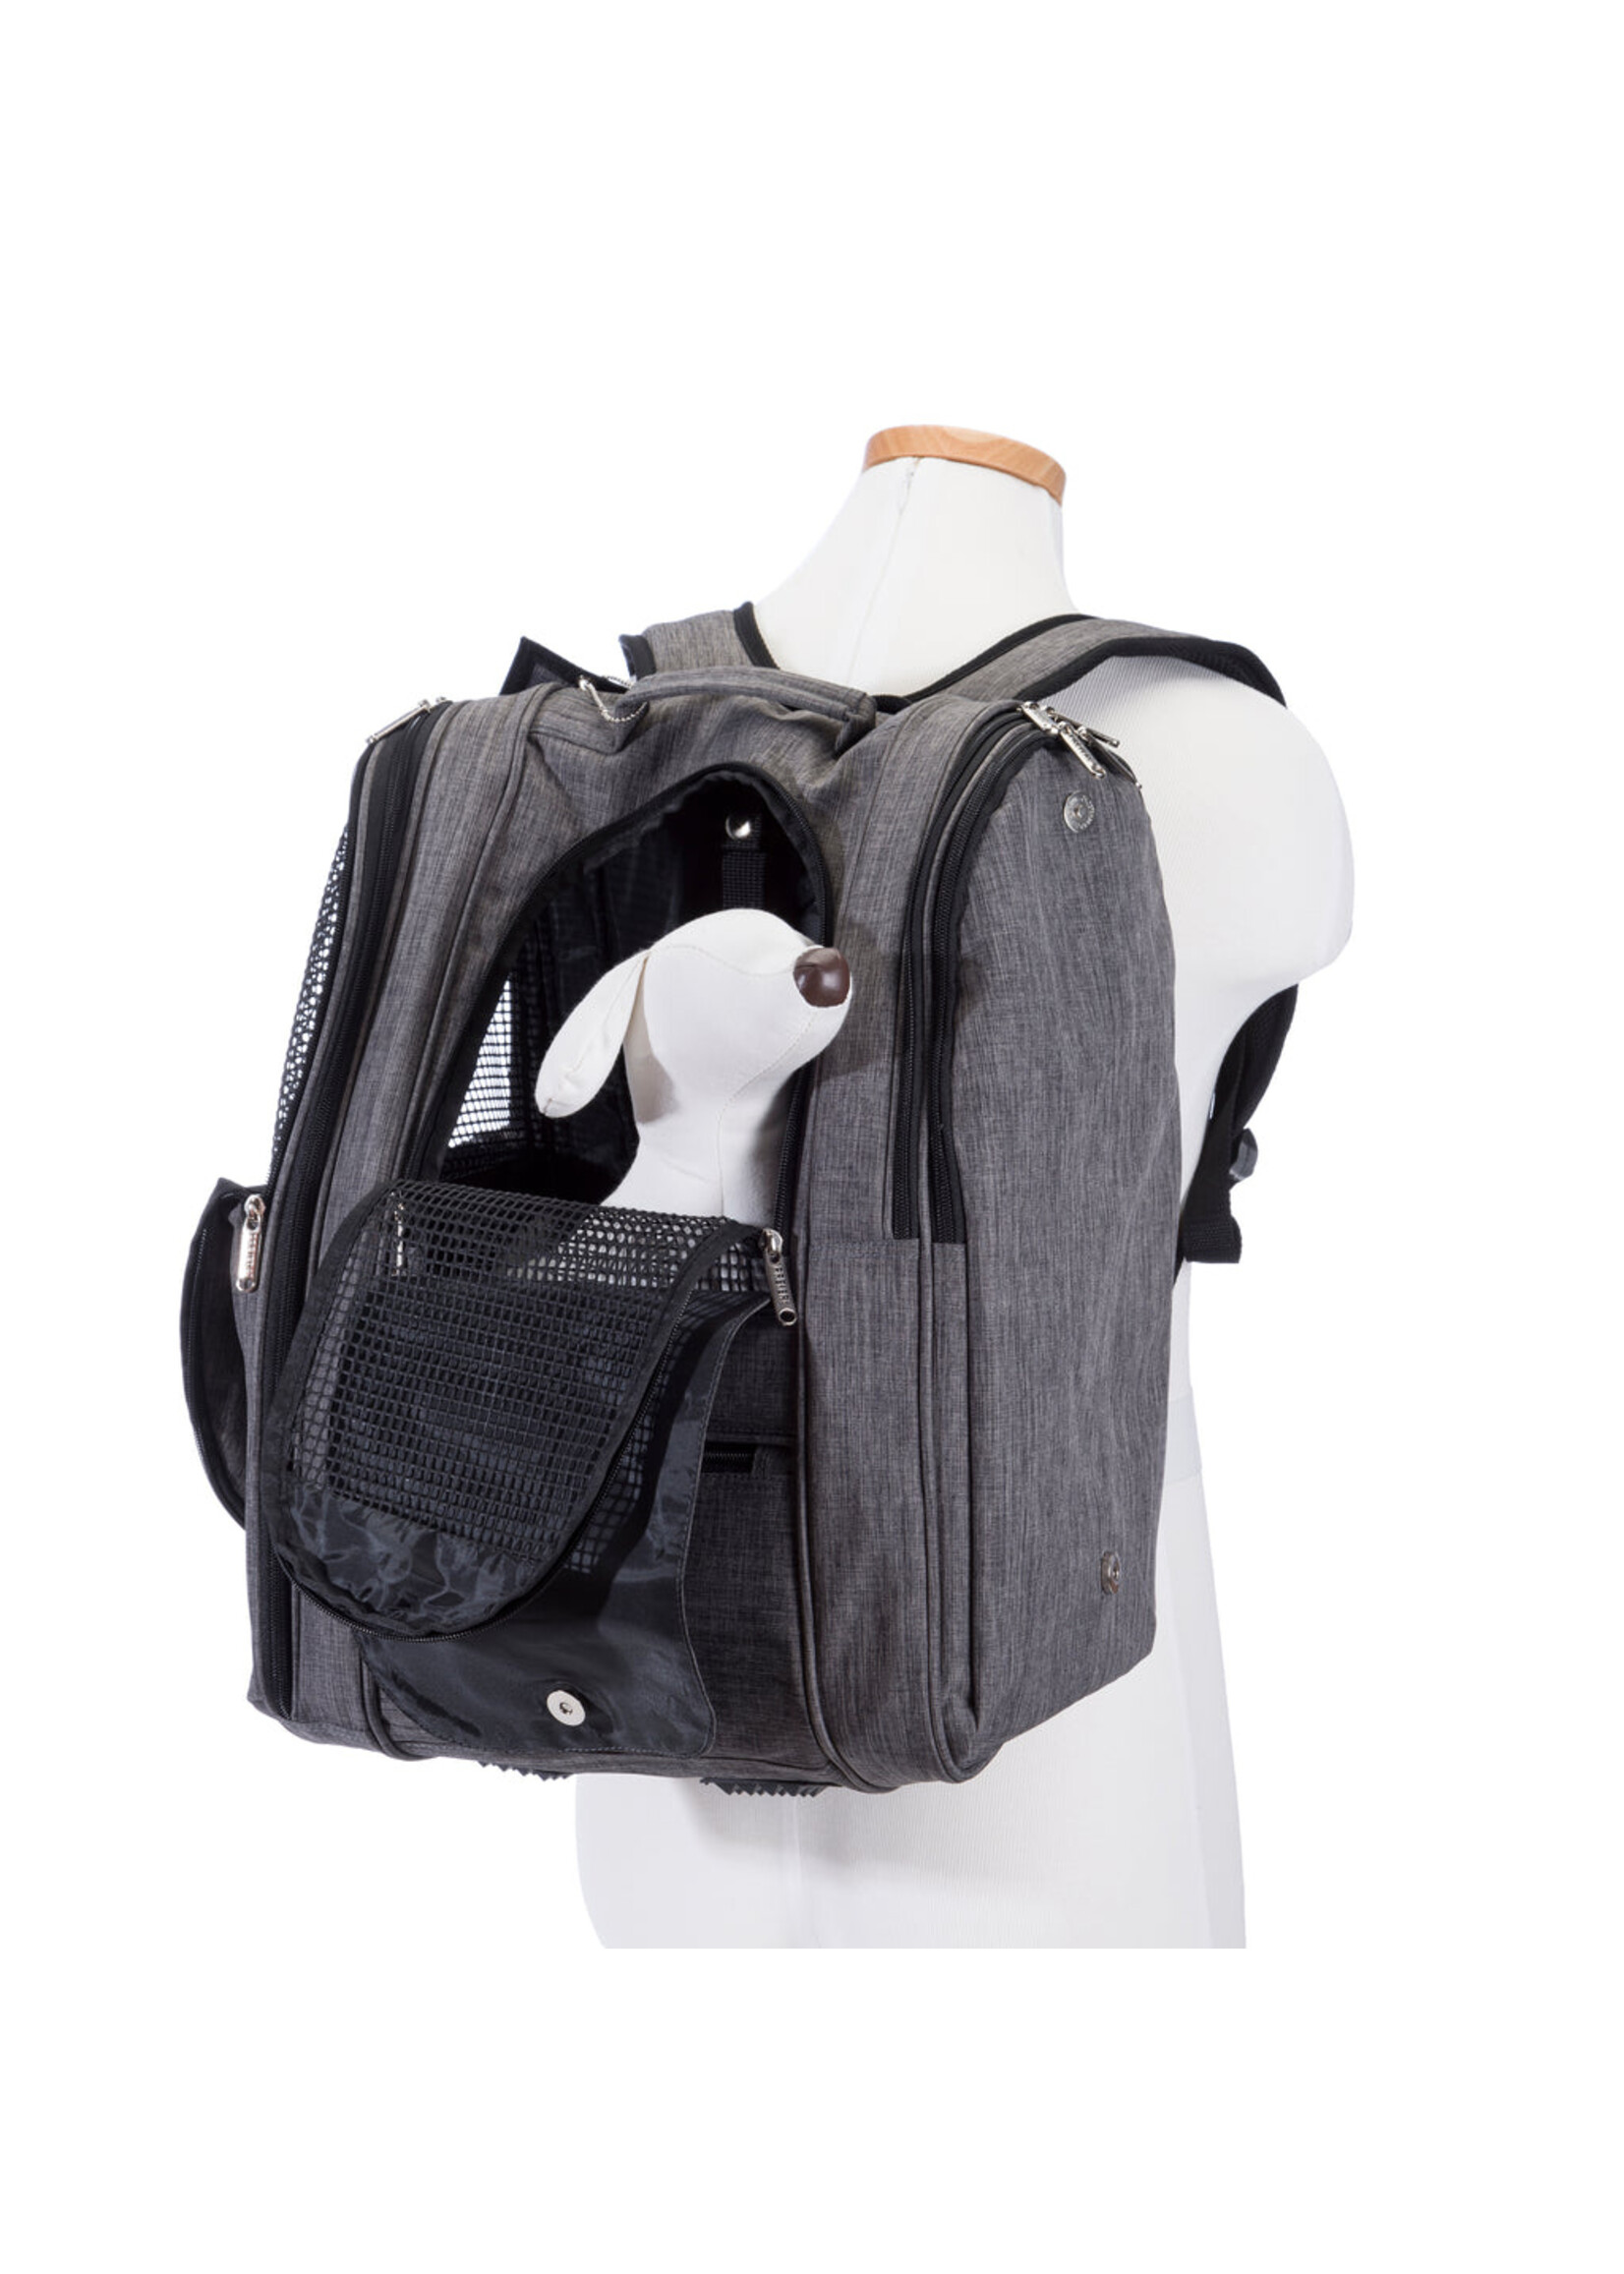 Prefer Pets Adventure Backpack Pet Carrier 14" x 11" x 17" Heathered Gray